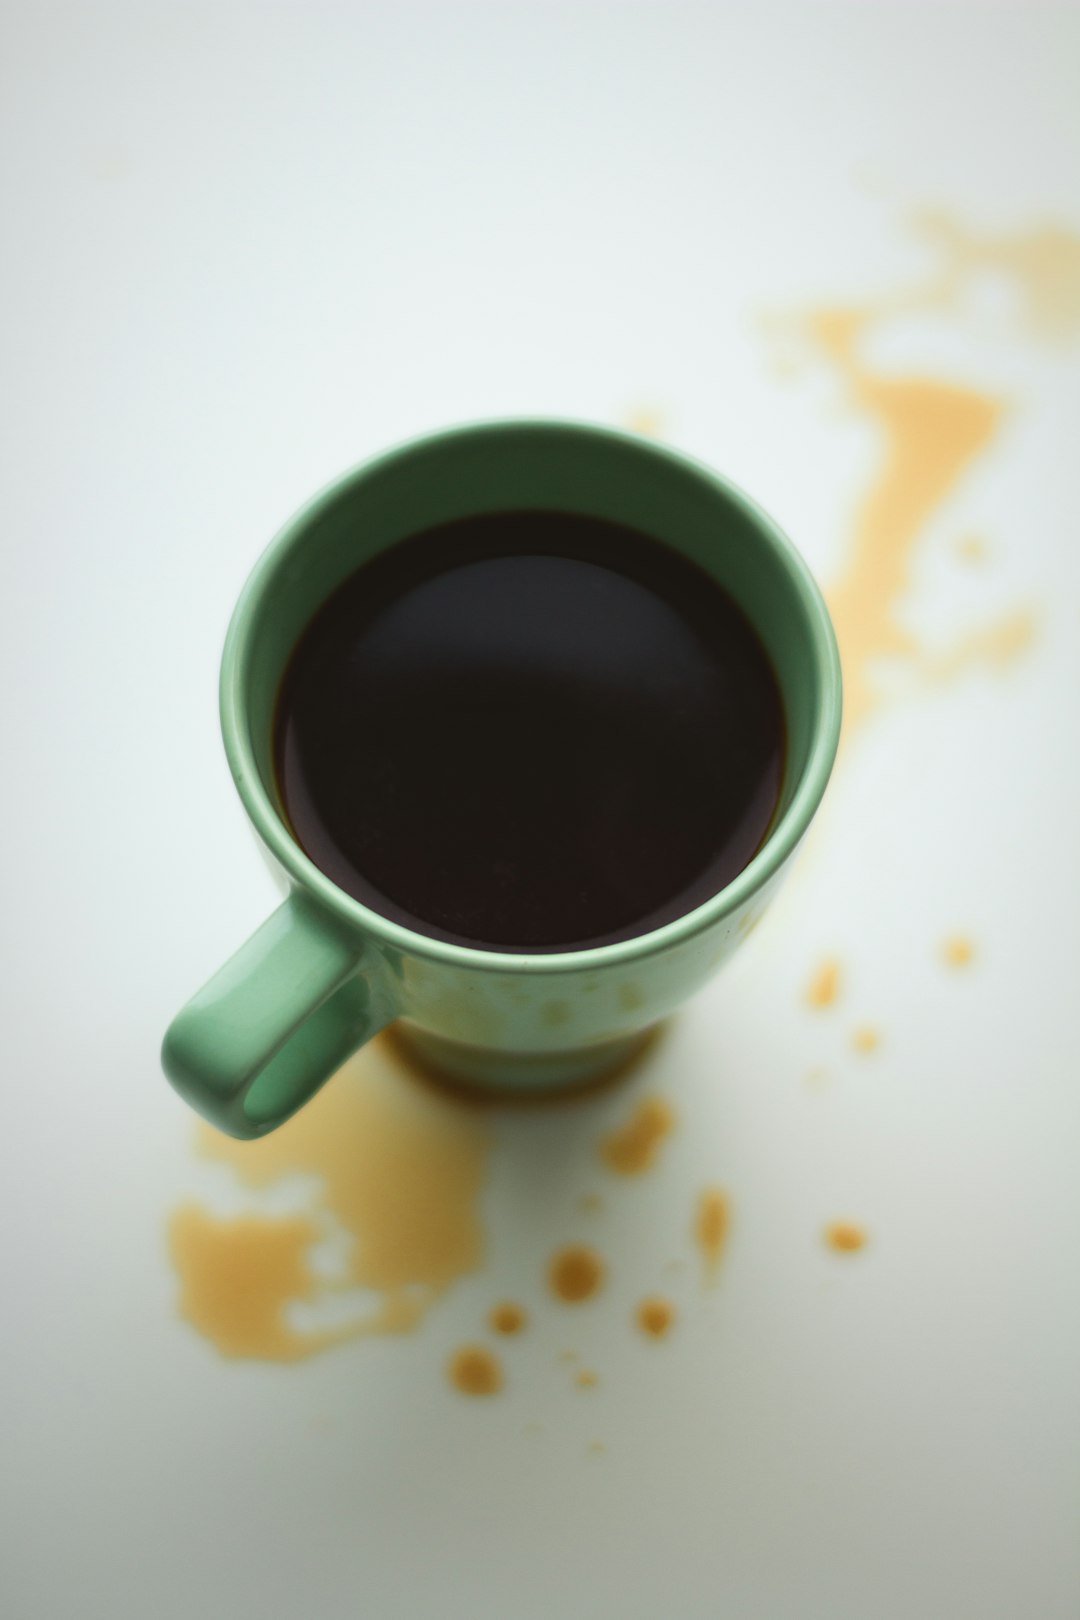 How to Remove Coffee Stains from Cups